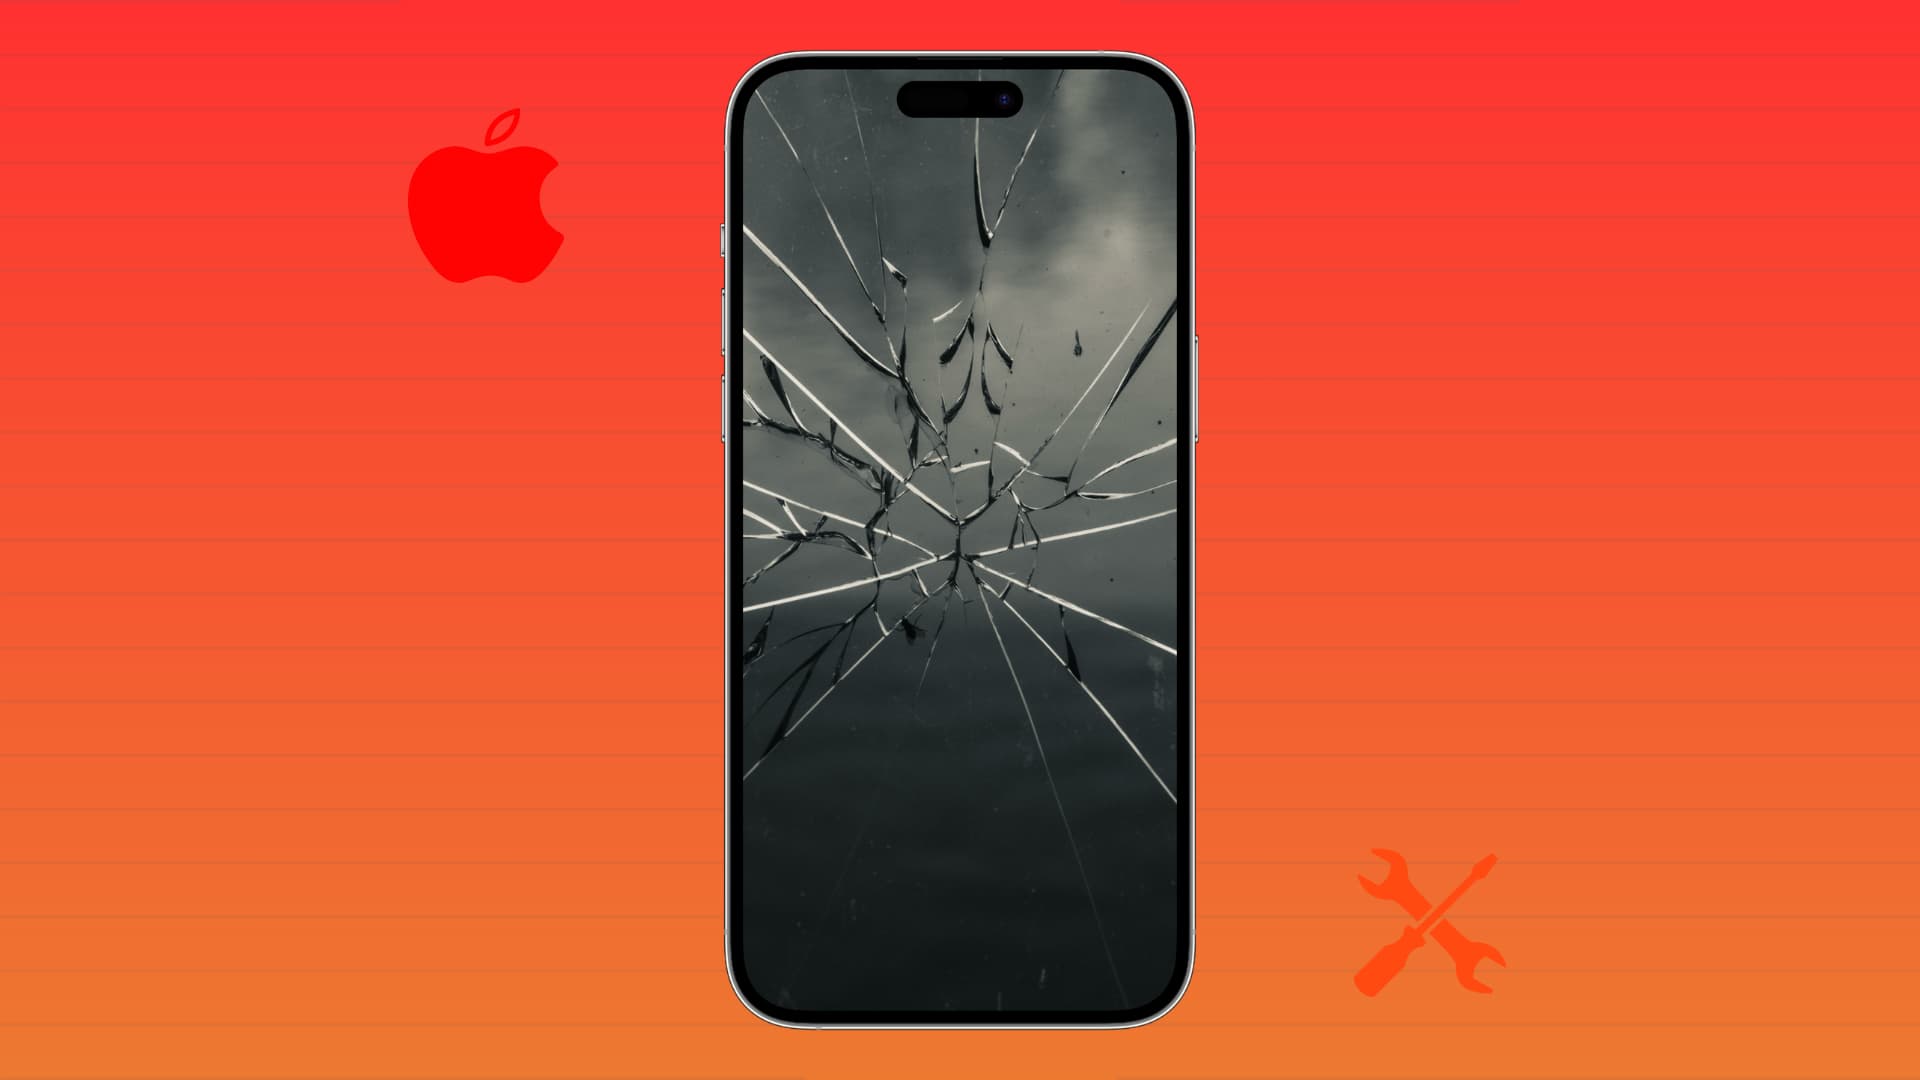 iPhone with broken glass image on screen